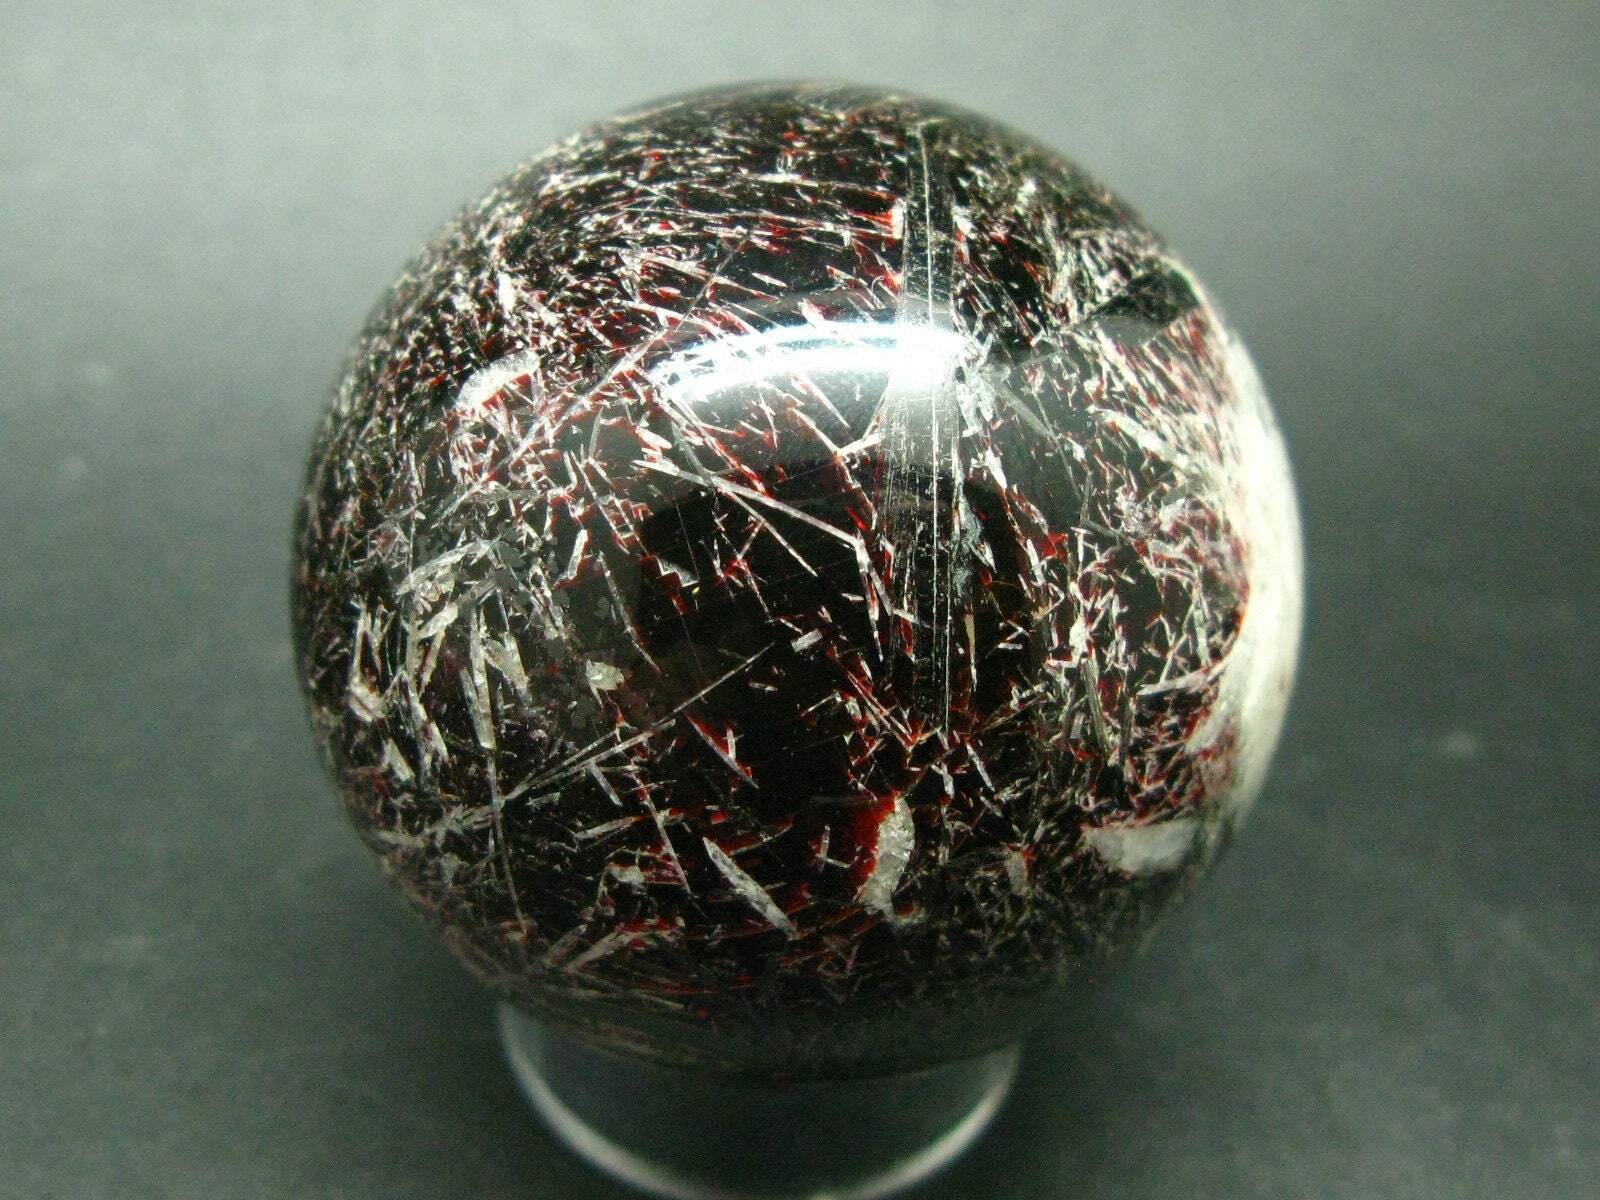 Rare Red Villiaumite Crystal Sphere Ball from Russia - 2.1\